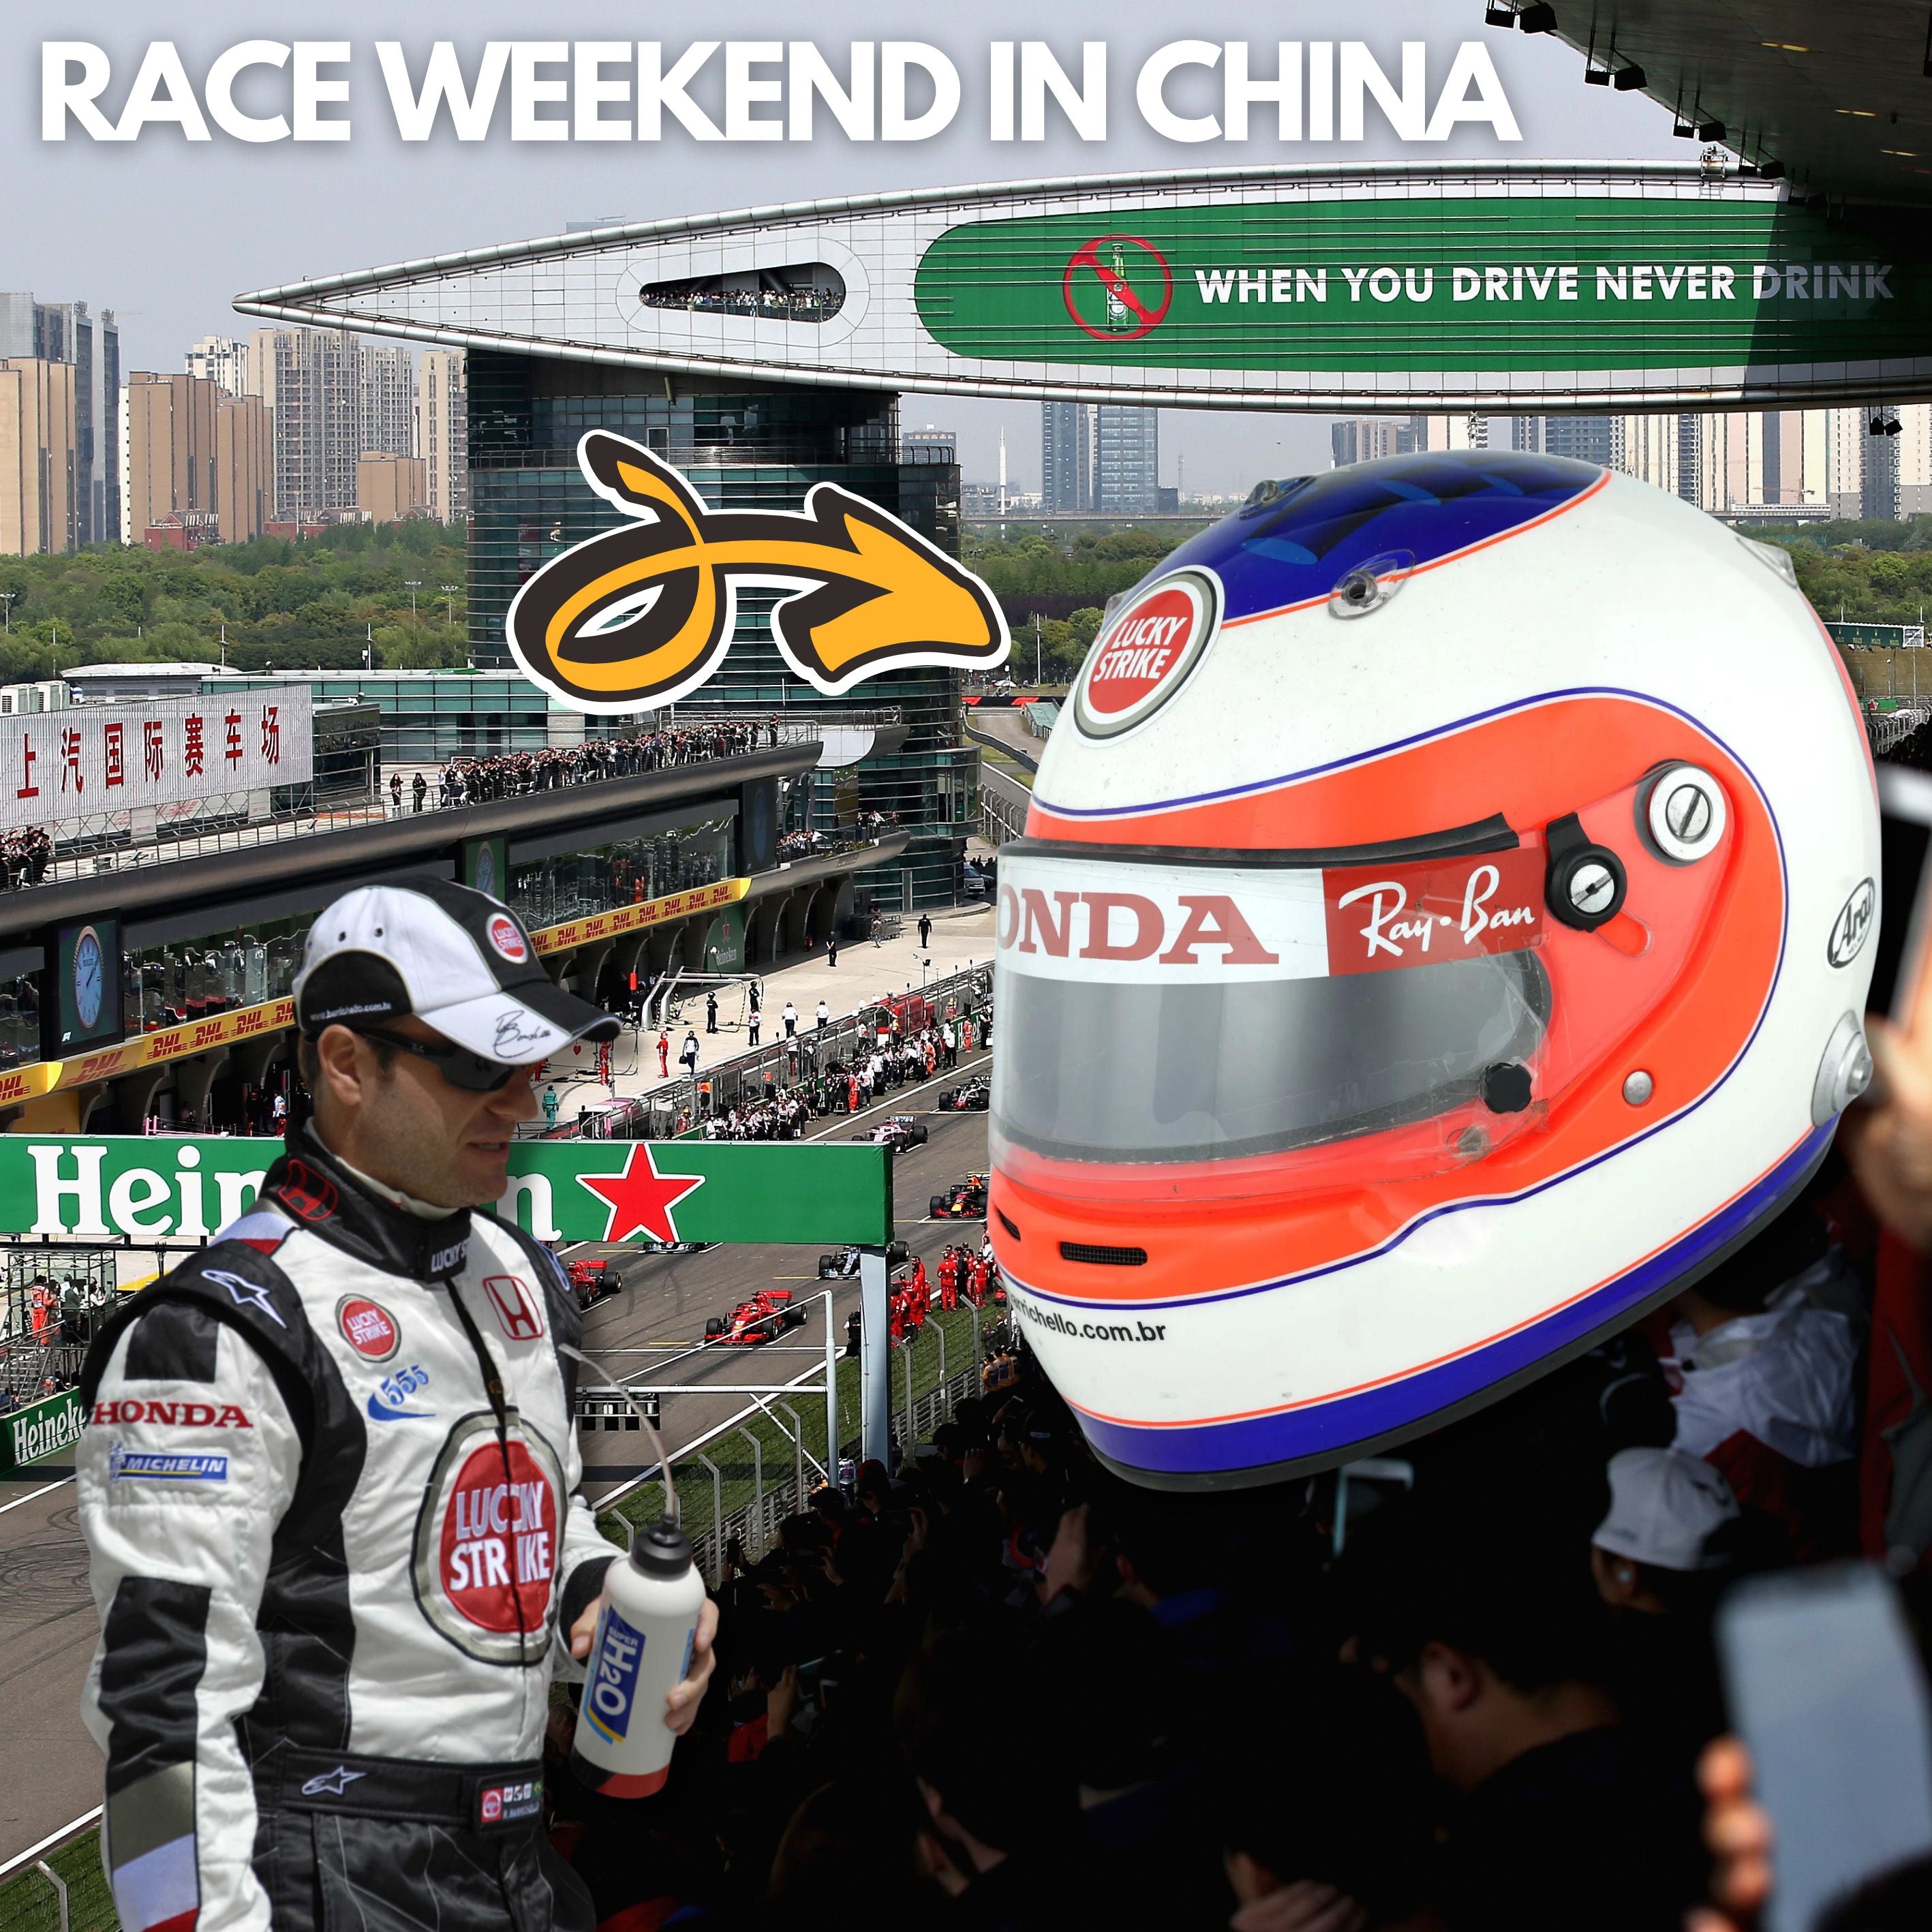 Formula 1 is back in China!